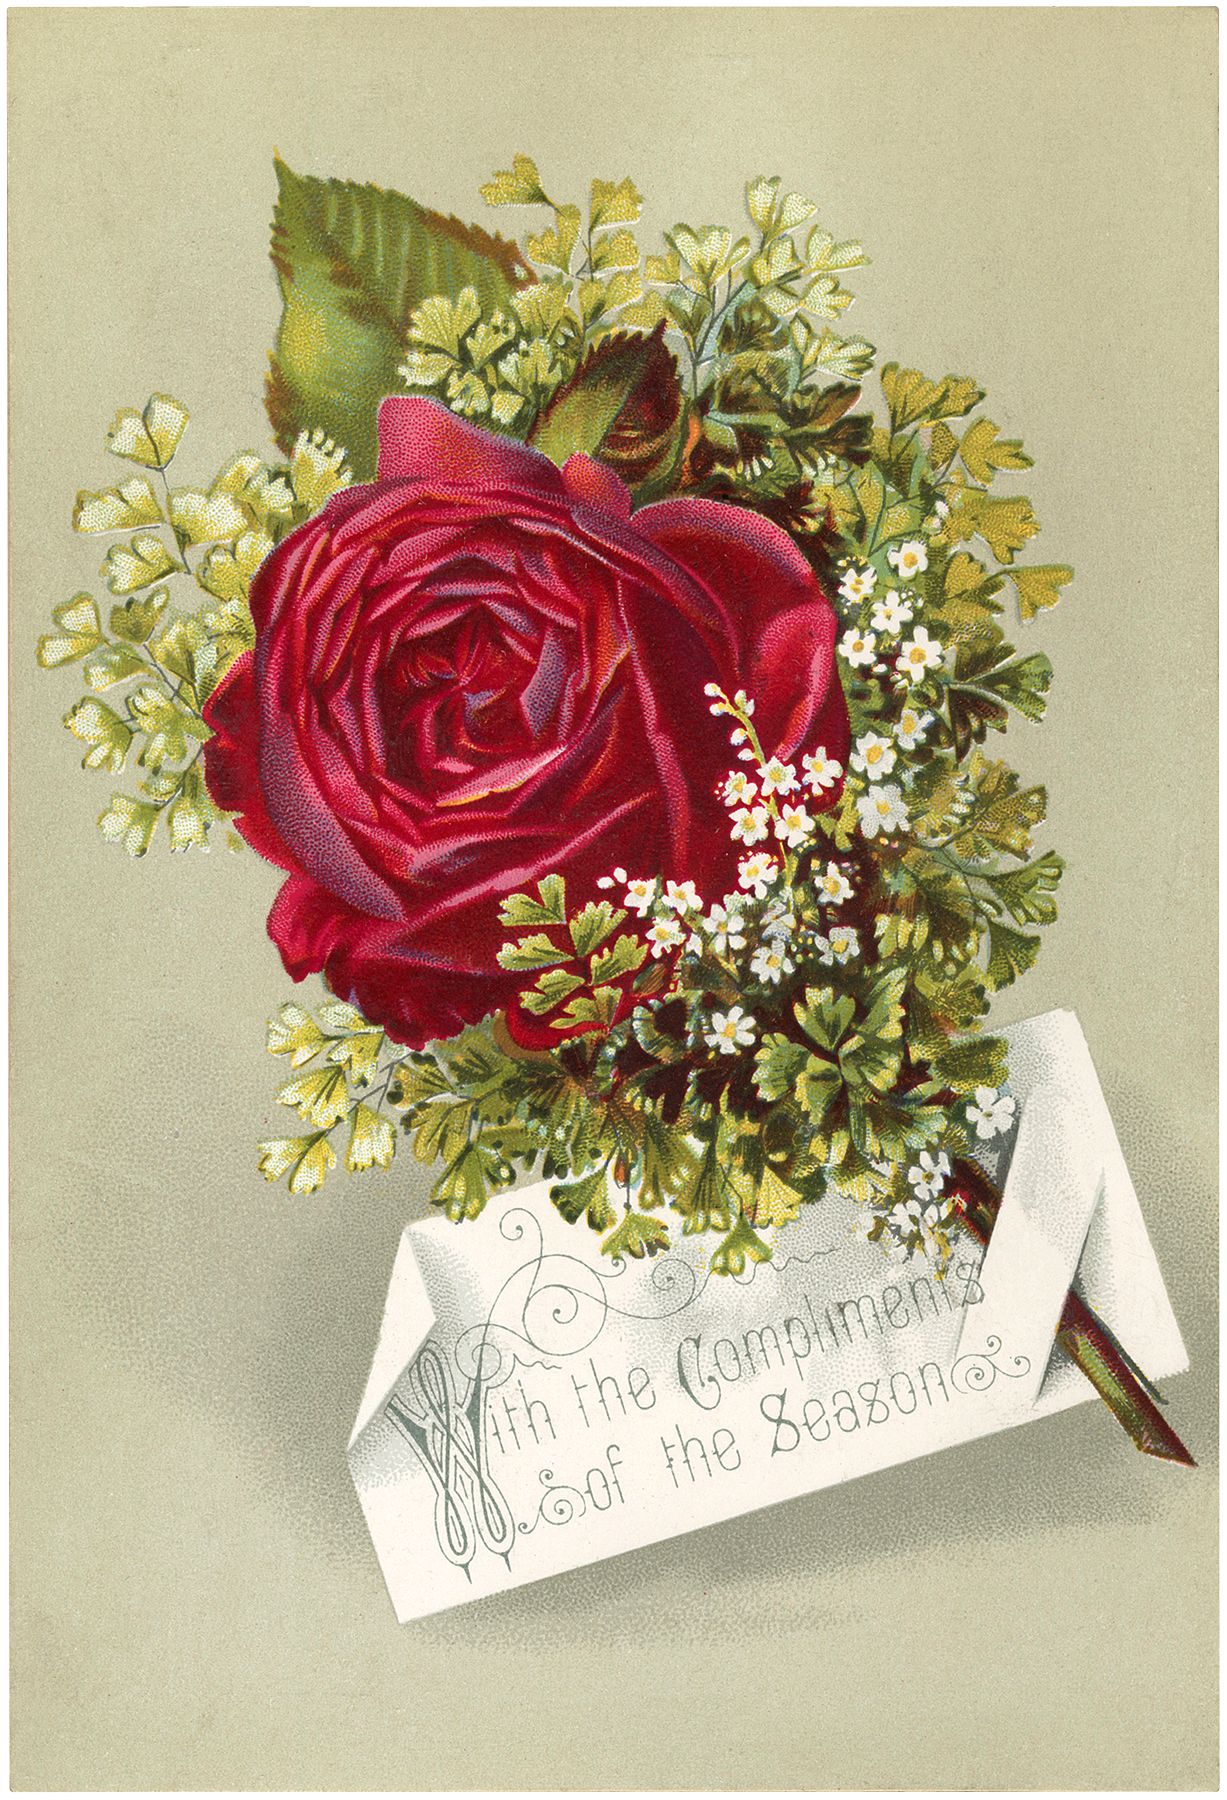 Beautiful Victorian Red Rose Image! - The Graphics Fairy